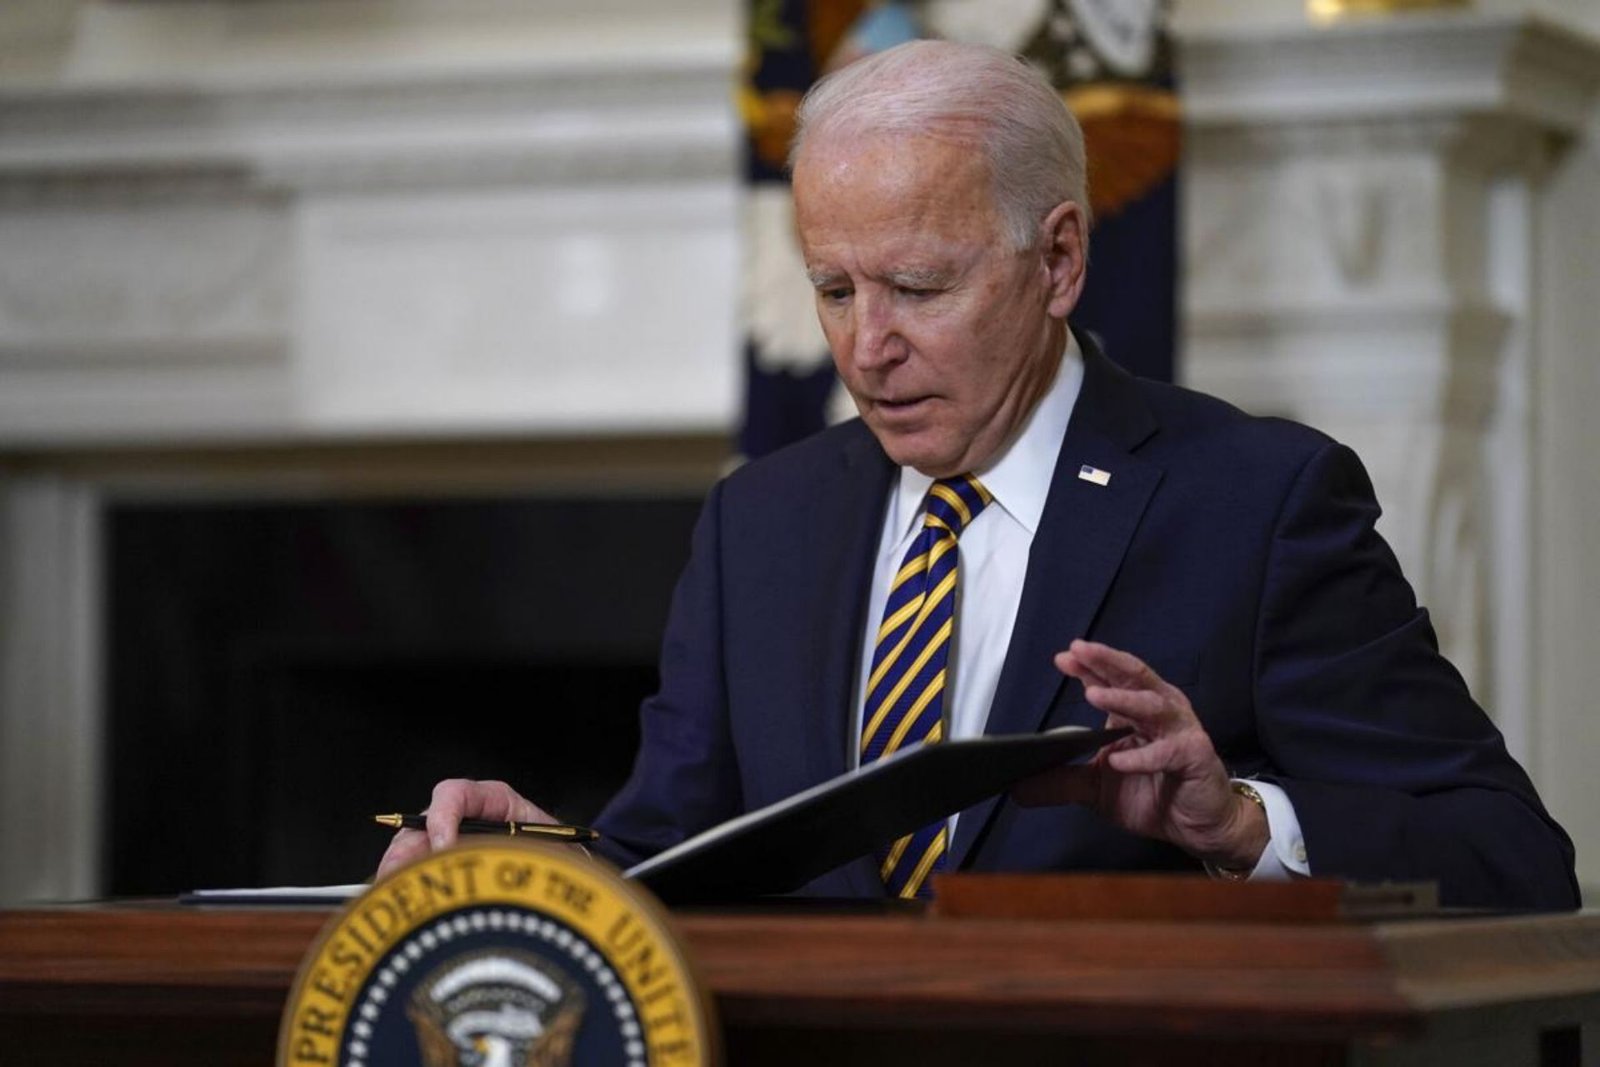 Biden Is Betting On Wage Growth, While The GOP Is Concerned About Inflation.